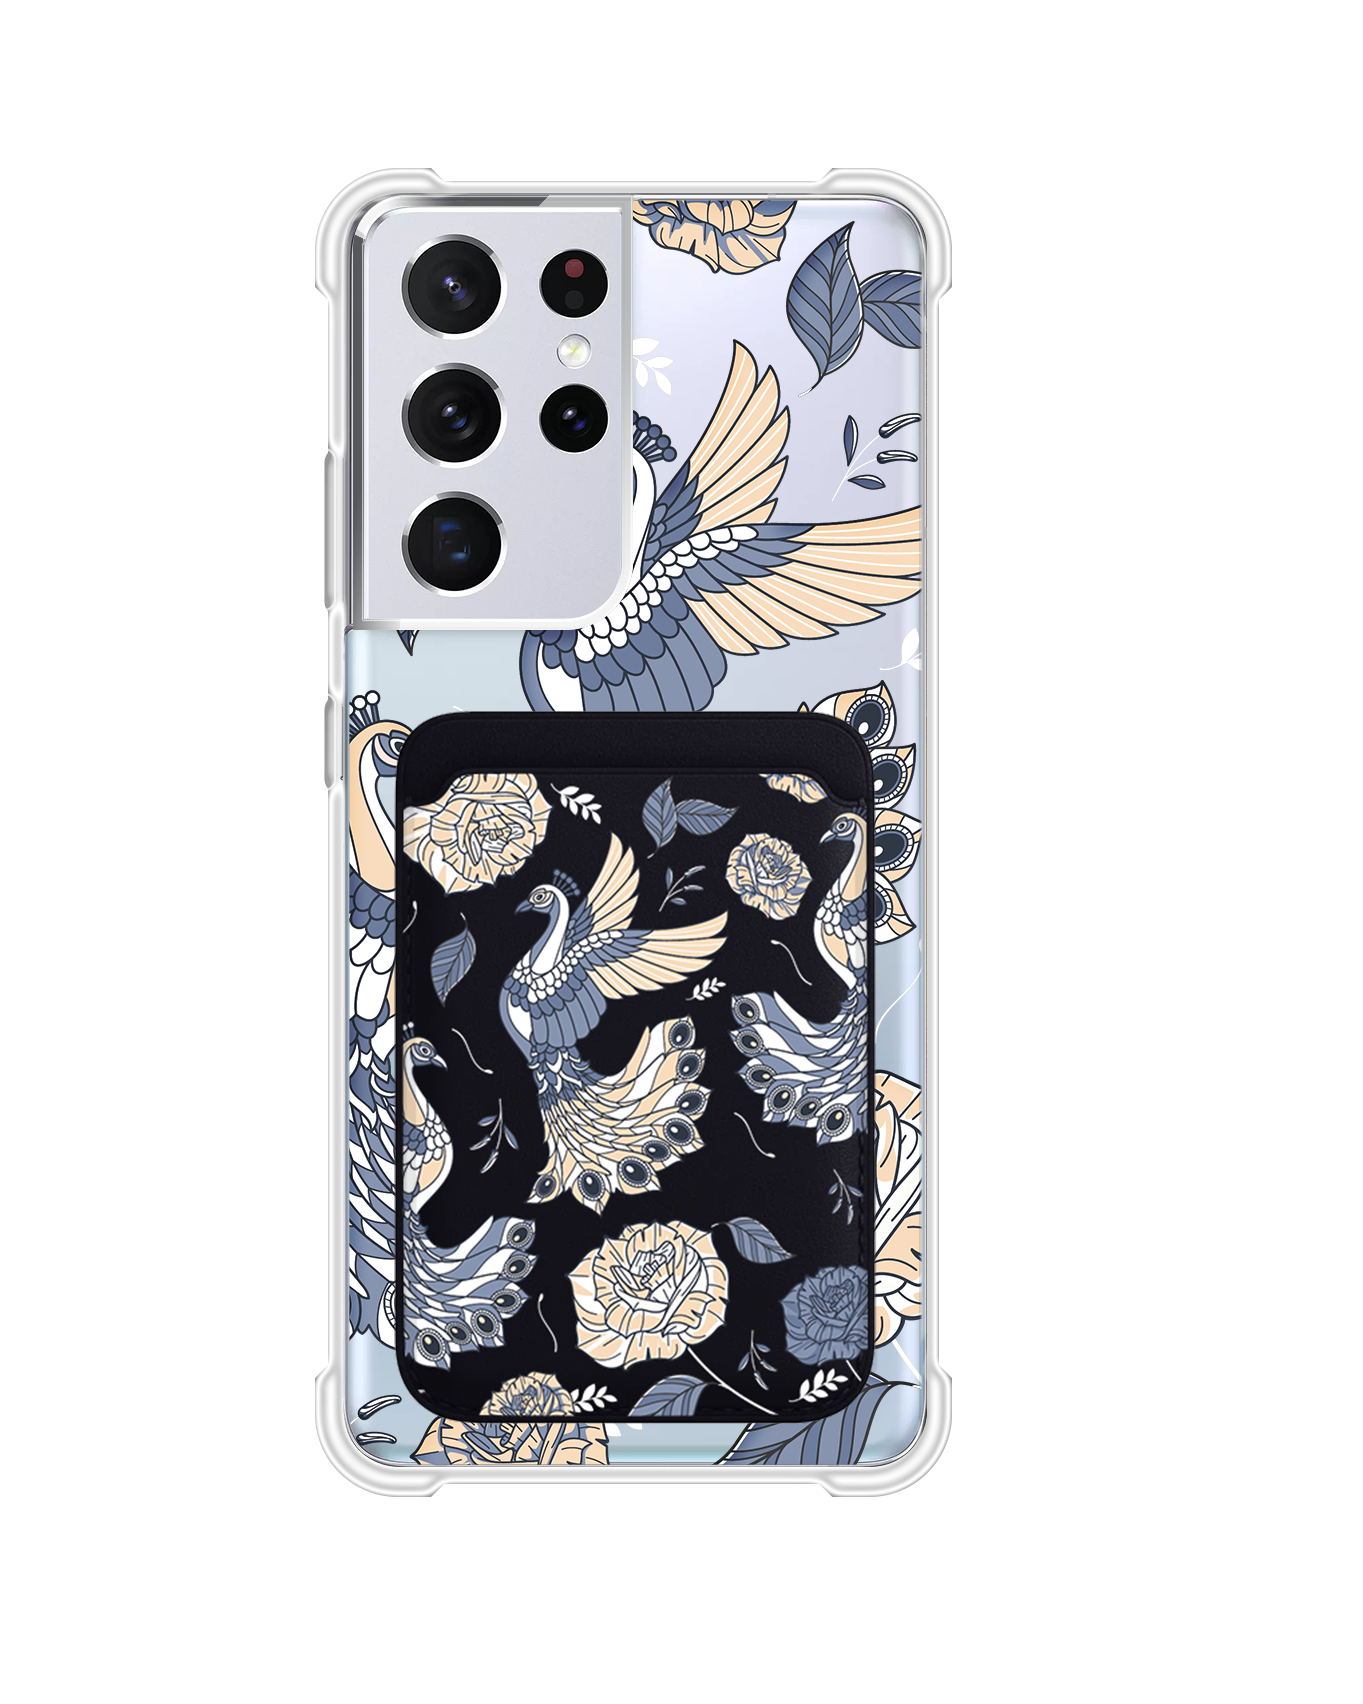 Android Magnetic Wallet Case - Bird of Paradise 6.0